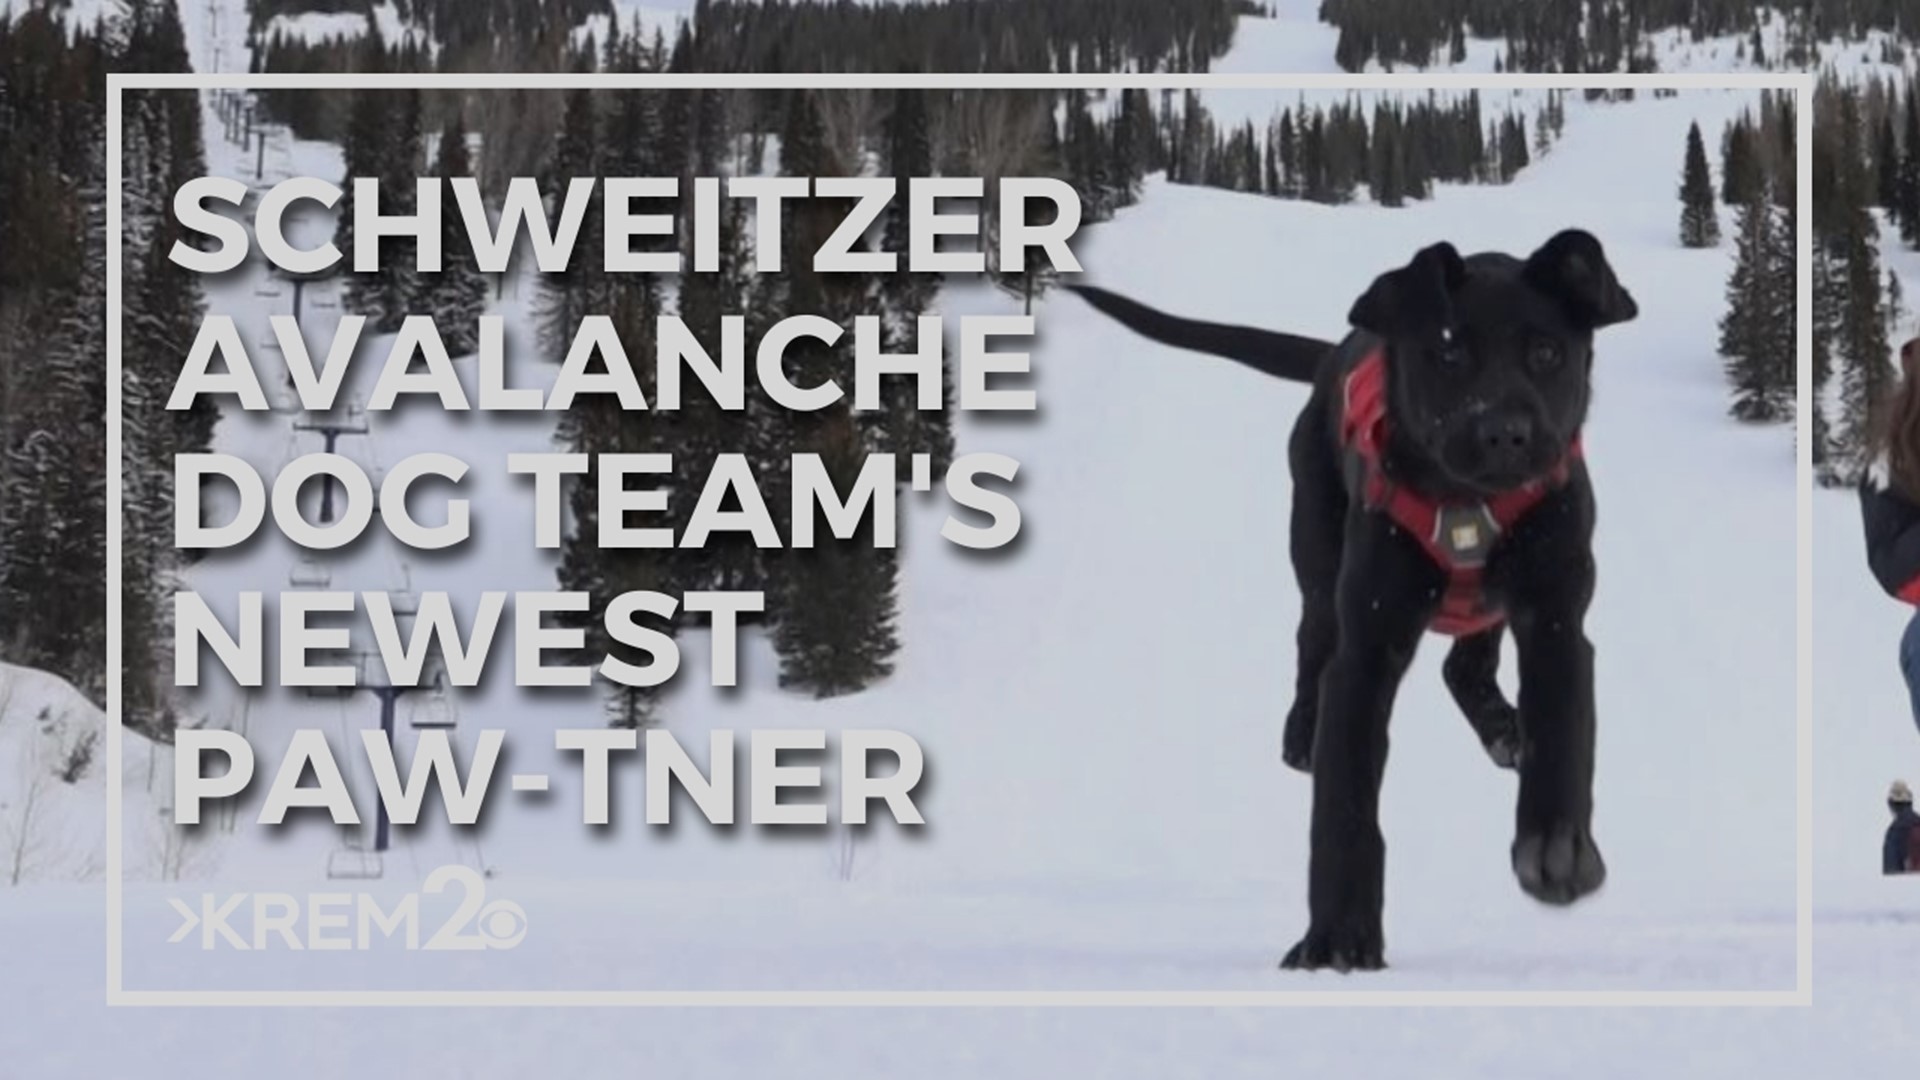 After Annie had a health scare, the team up at Schweitzer brought in a new friend to take on some of her workload.